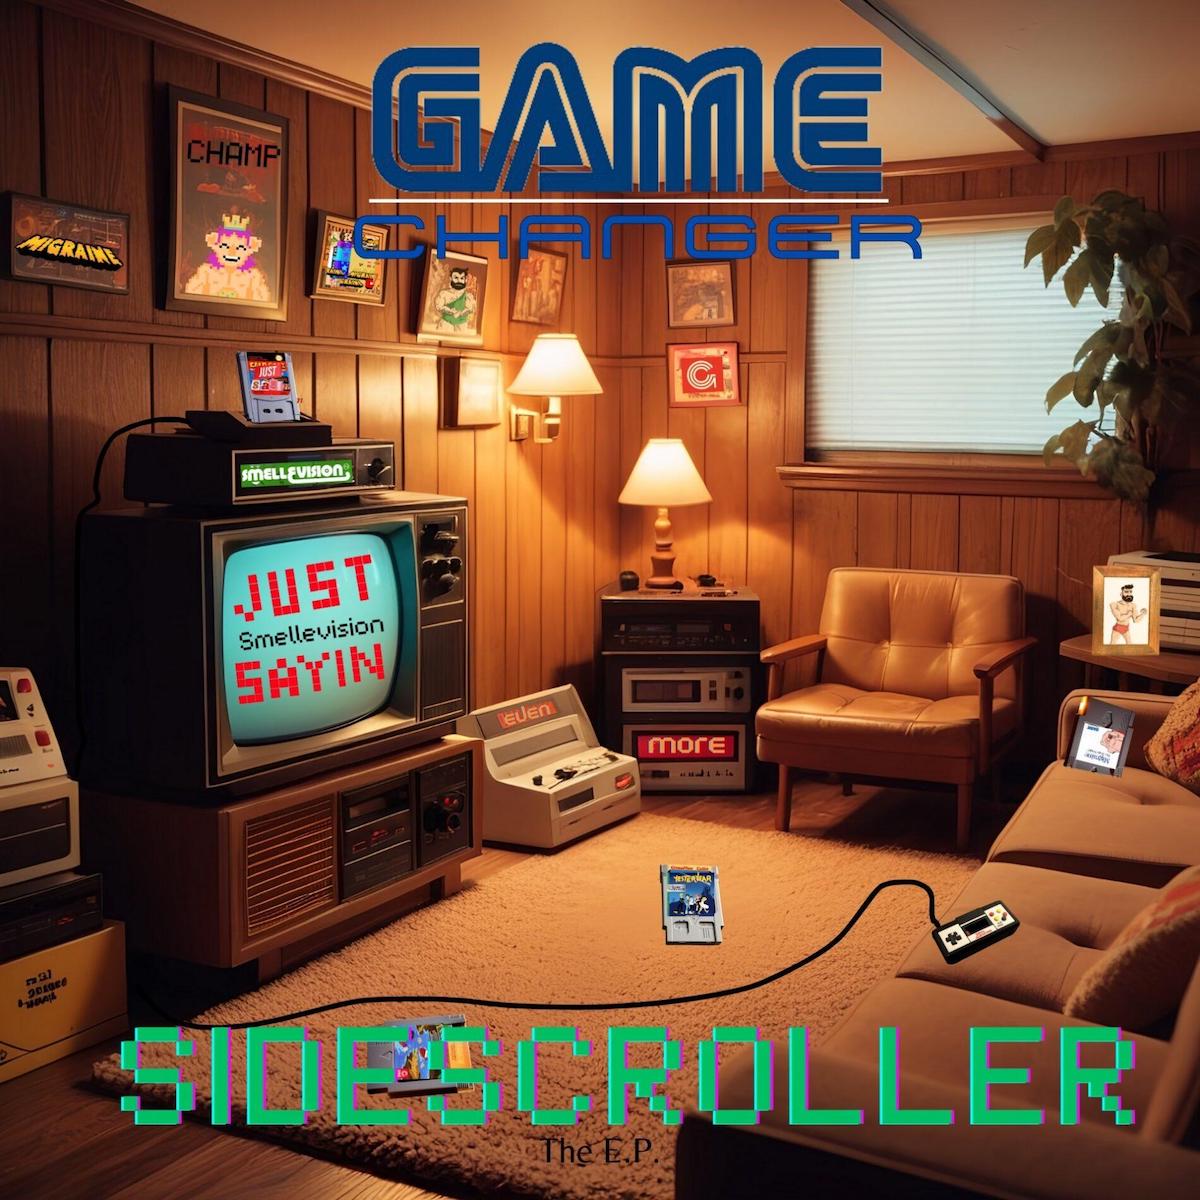 EP REVIEW: Sidescroller by Game Changer